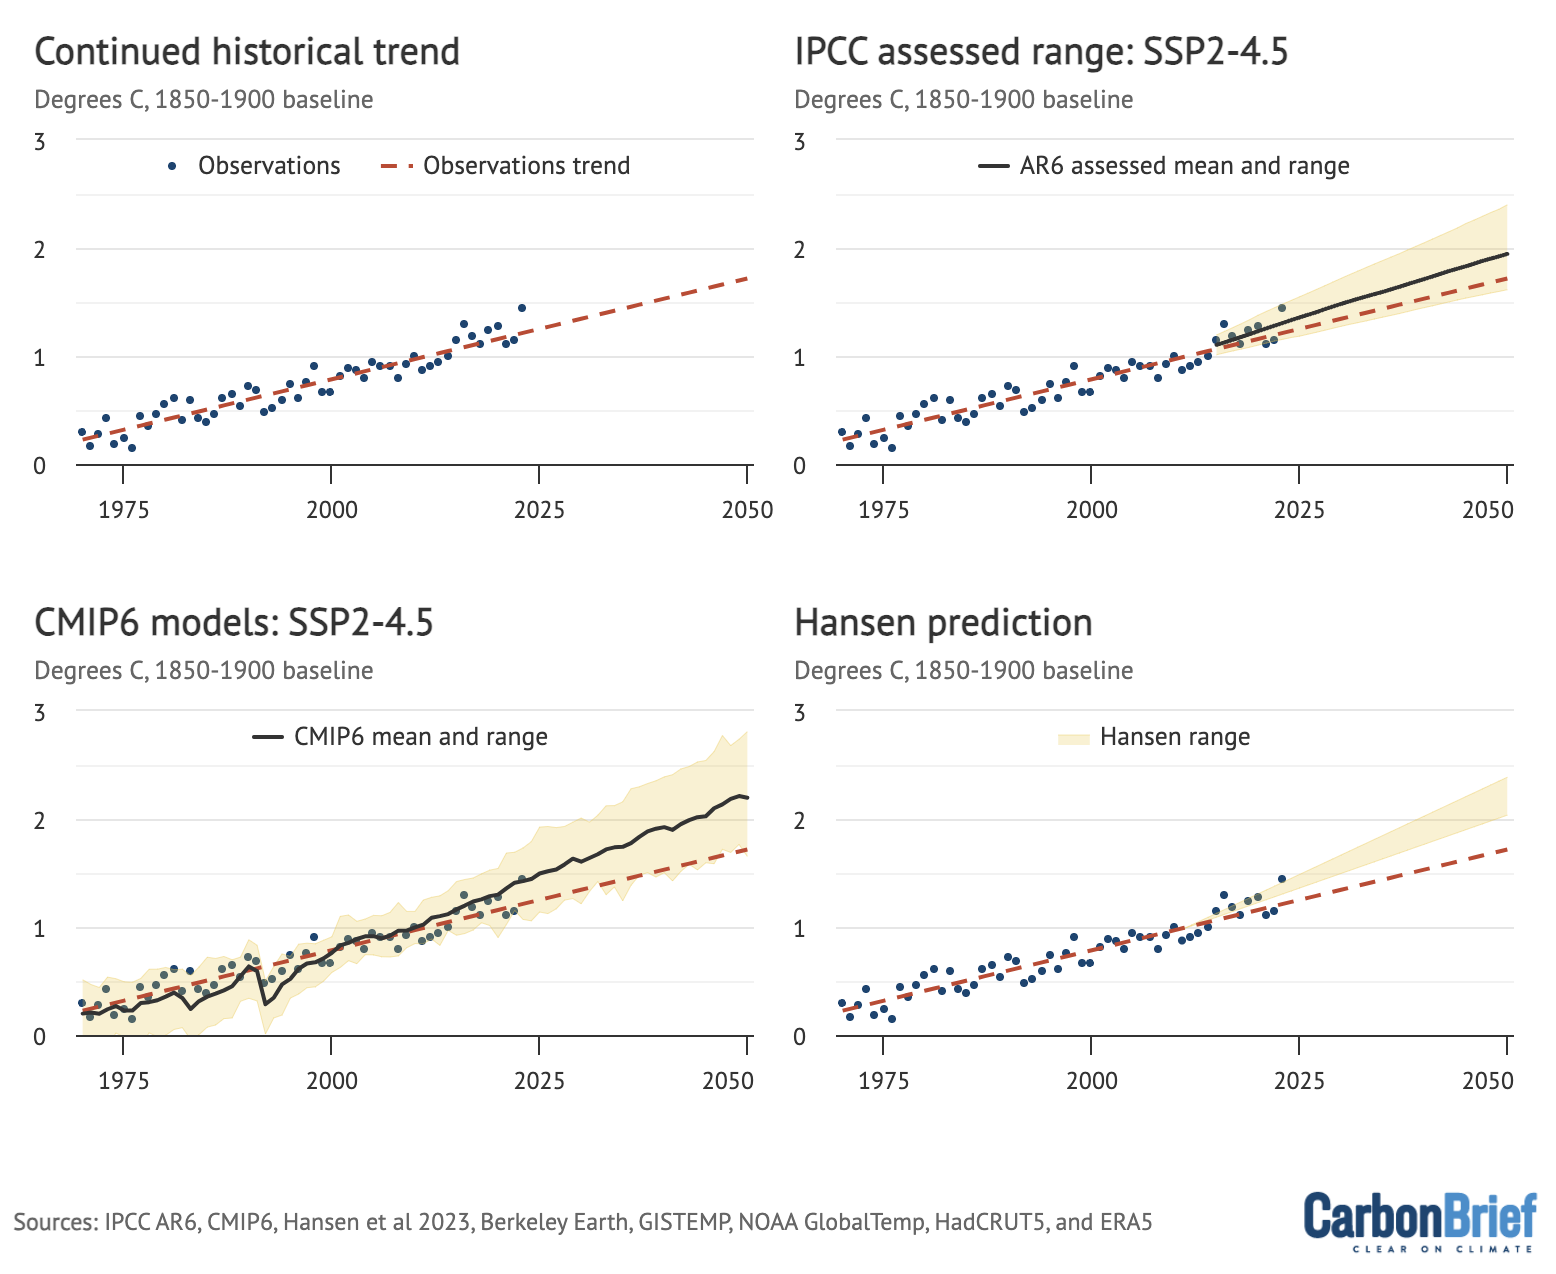 Comparison of historical and future warming projections from a continuation of the 1970-2023 linear trend (top left), the IPCC AR6 assessed warming range for SSP2-4.5 (top right), the CMIP6 multimodal mean and range for SSP2-4.5 (bottom left) and Hansen et al 2023 (bottom right). Blue dots and red dashed lines show observations and trends, while the black lines and yellow shading show model projections and their ranges. Chart by Carbon Brief.